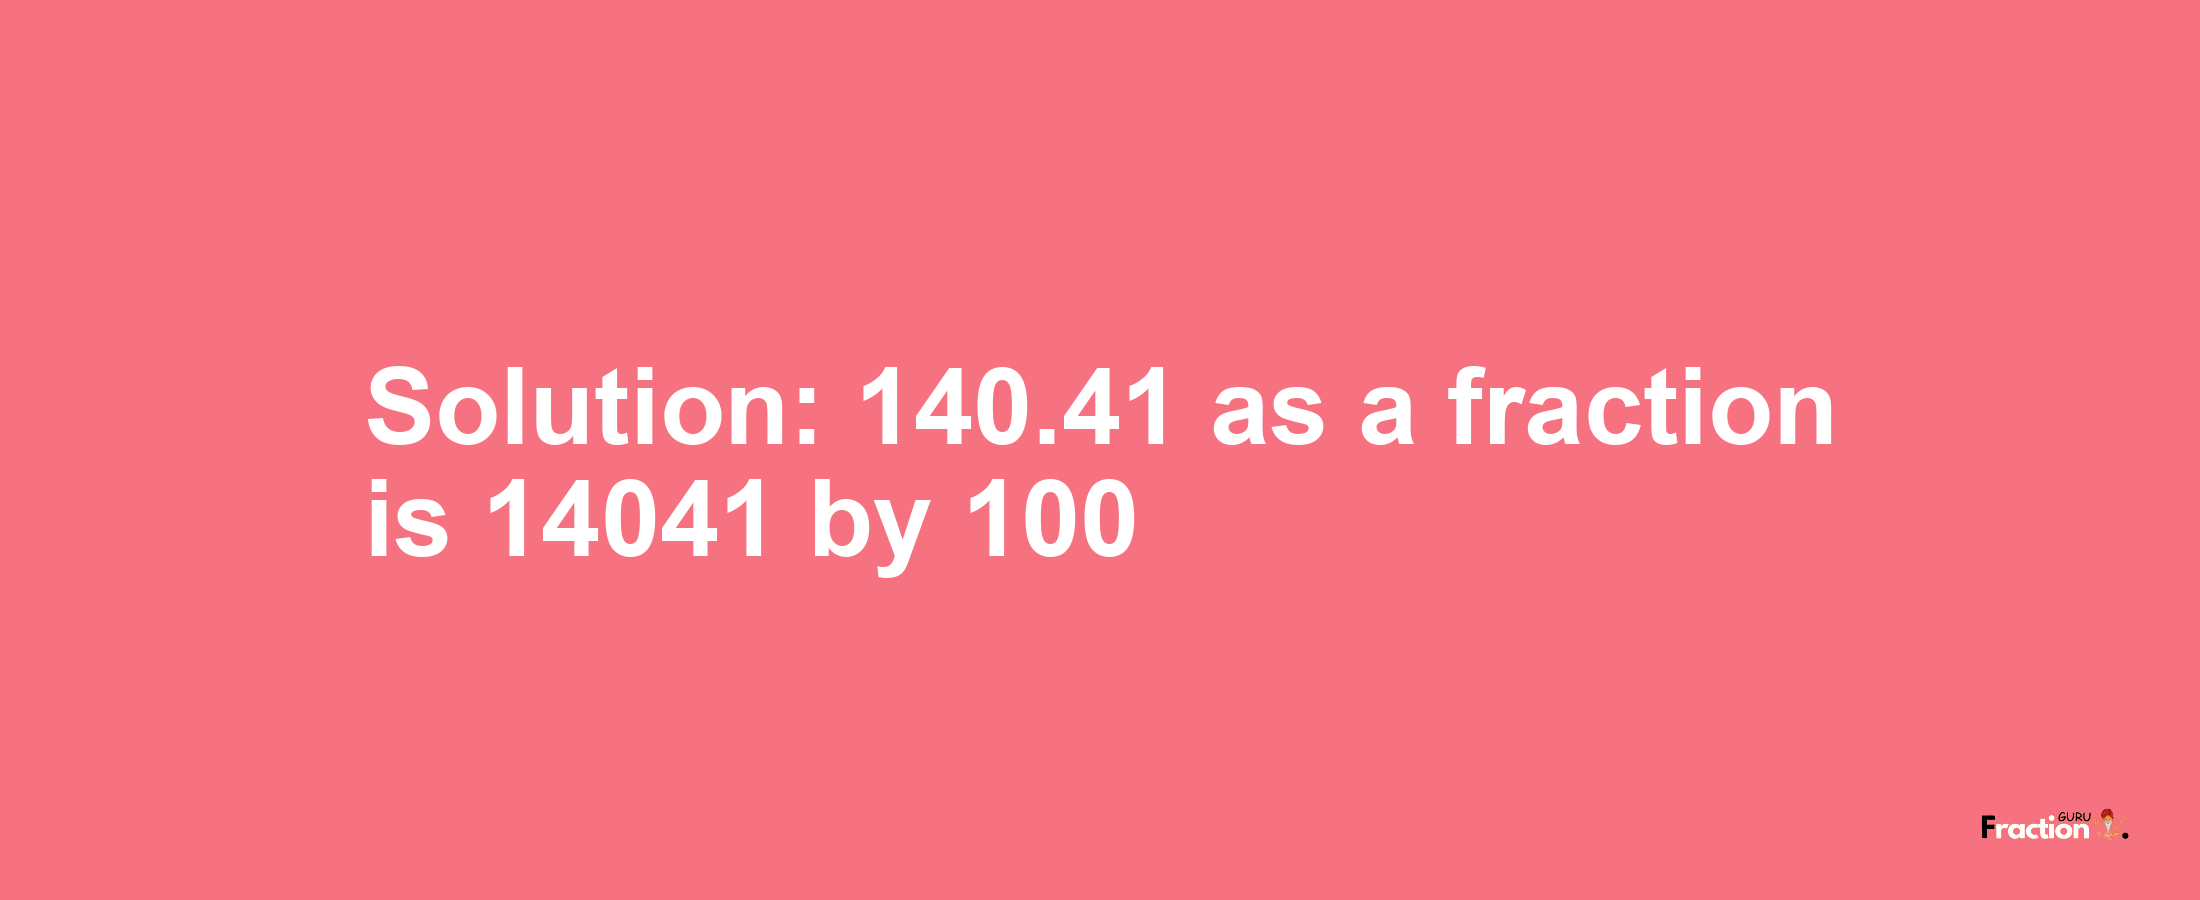 Solution:140.41 as a fraction is 14041/100